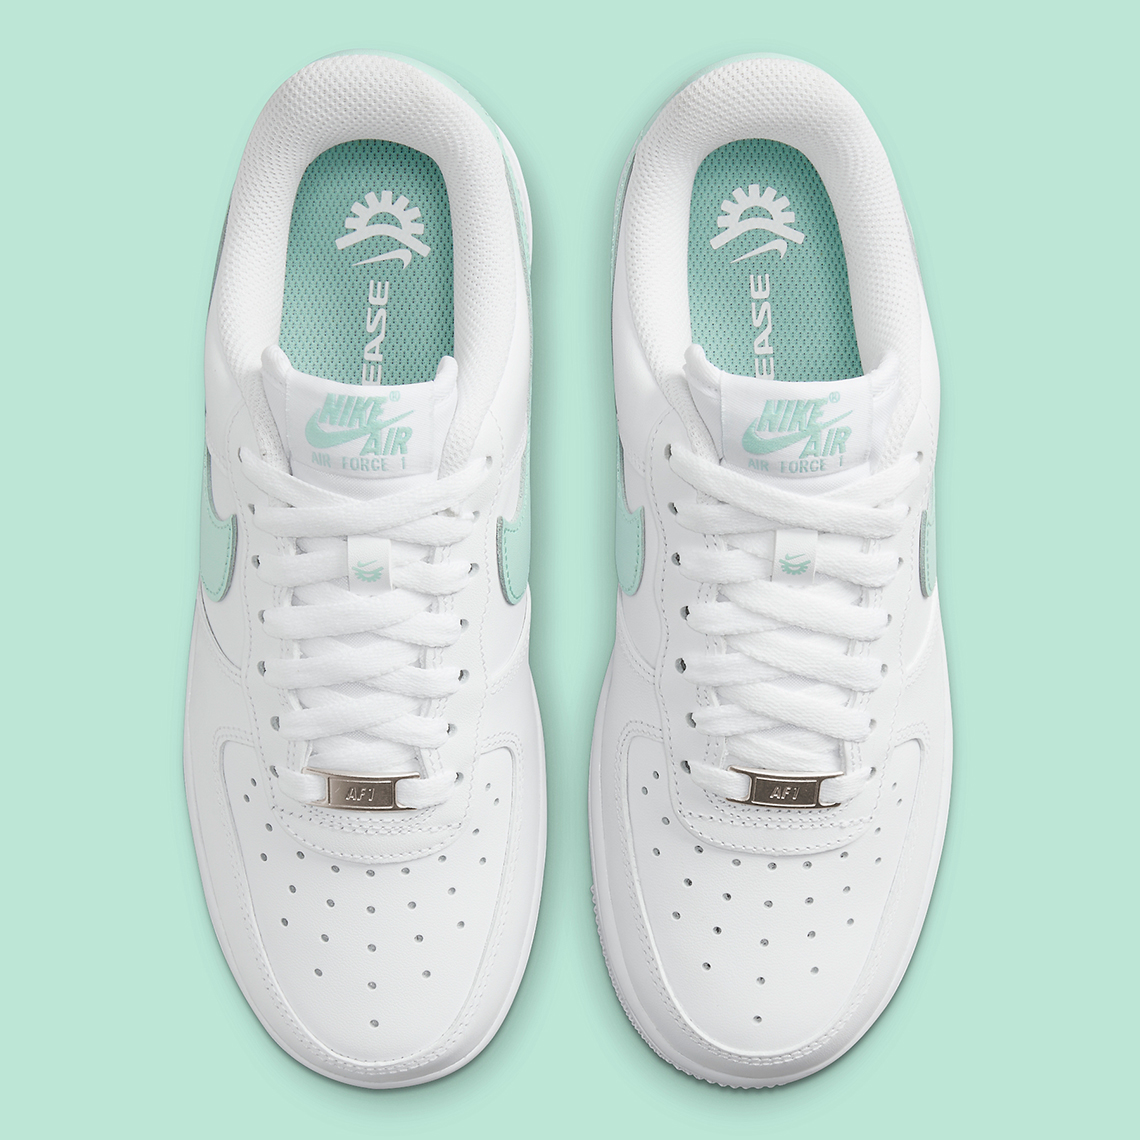 Nike Air Force 1 Low Flyease White Jade Ice Dx5883 101 3